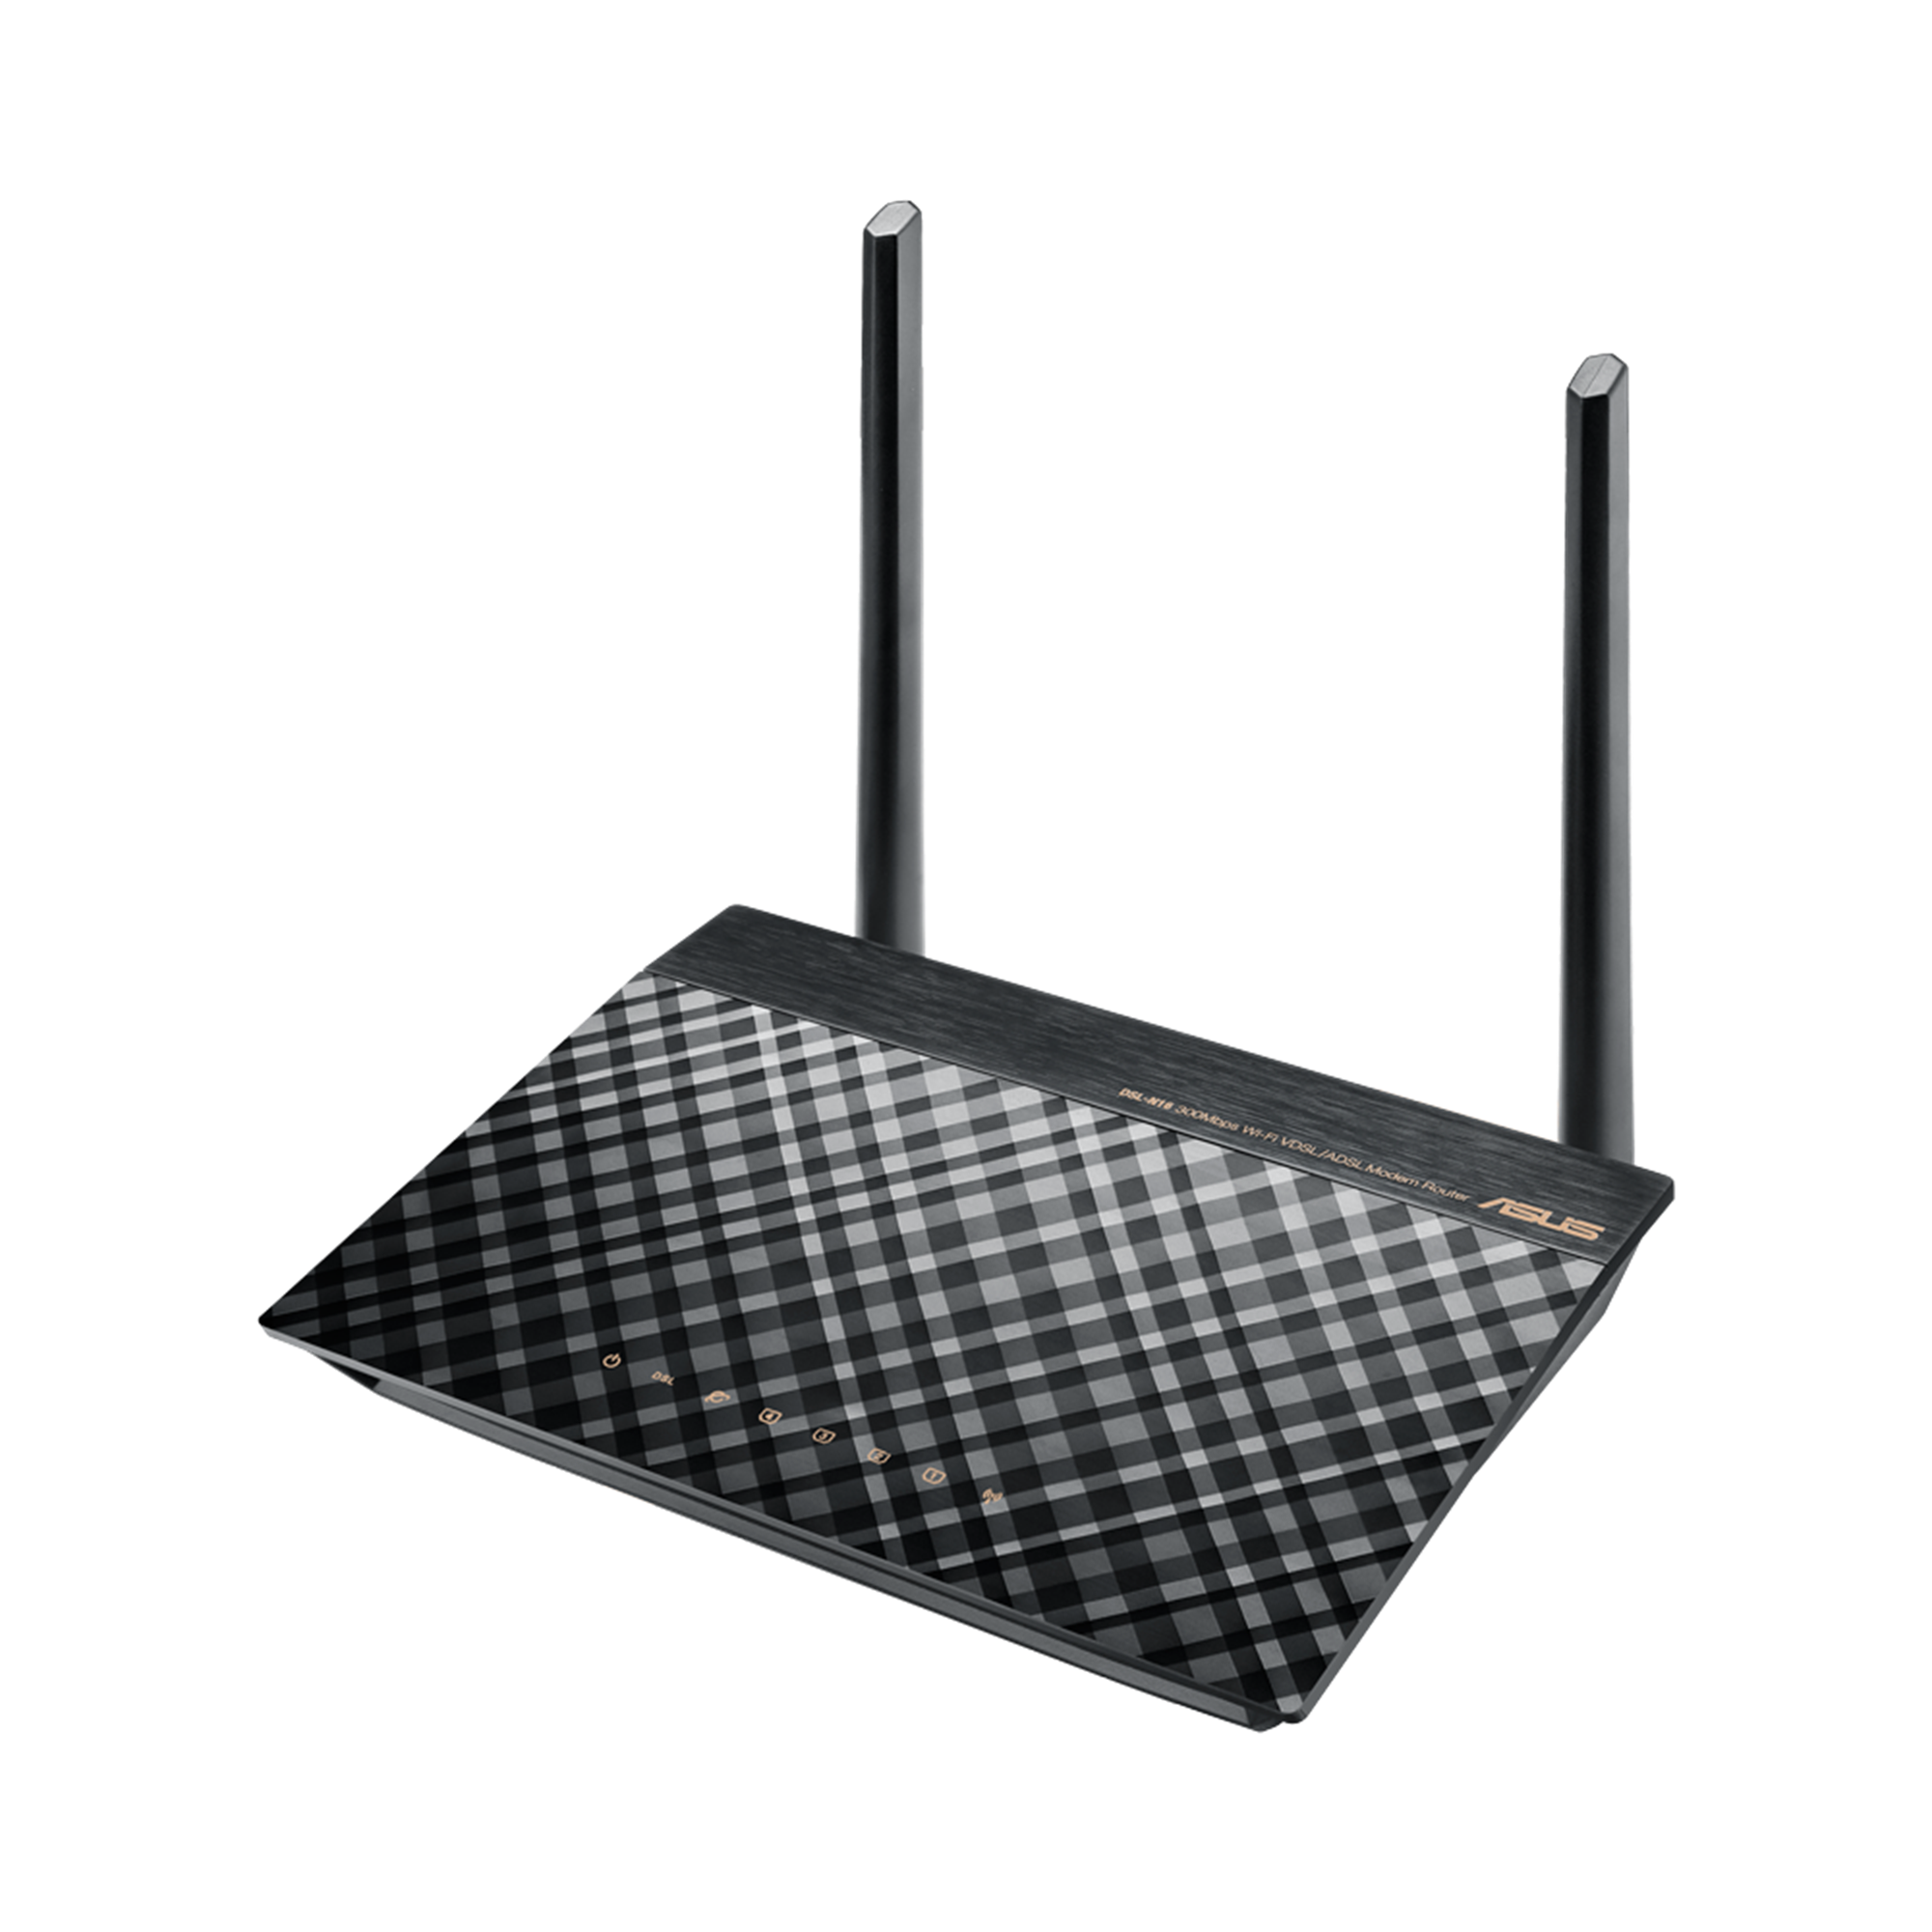 best wireless router for streaming hd video